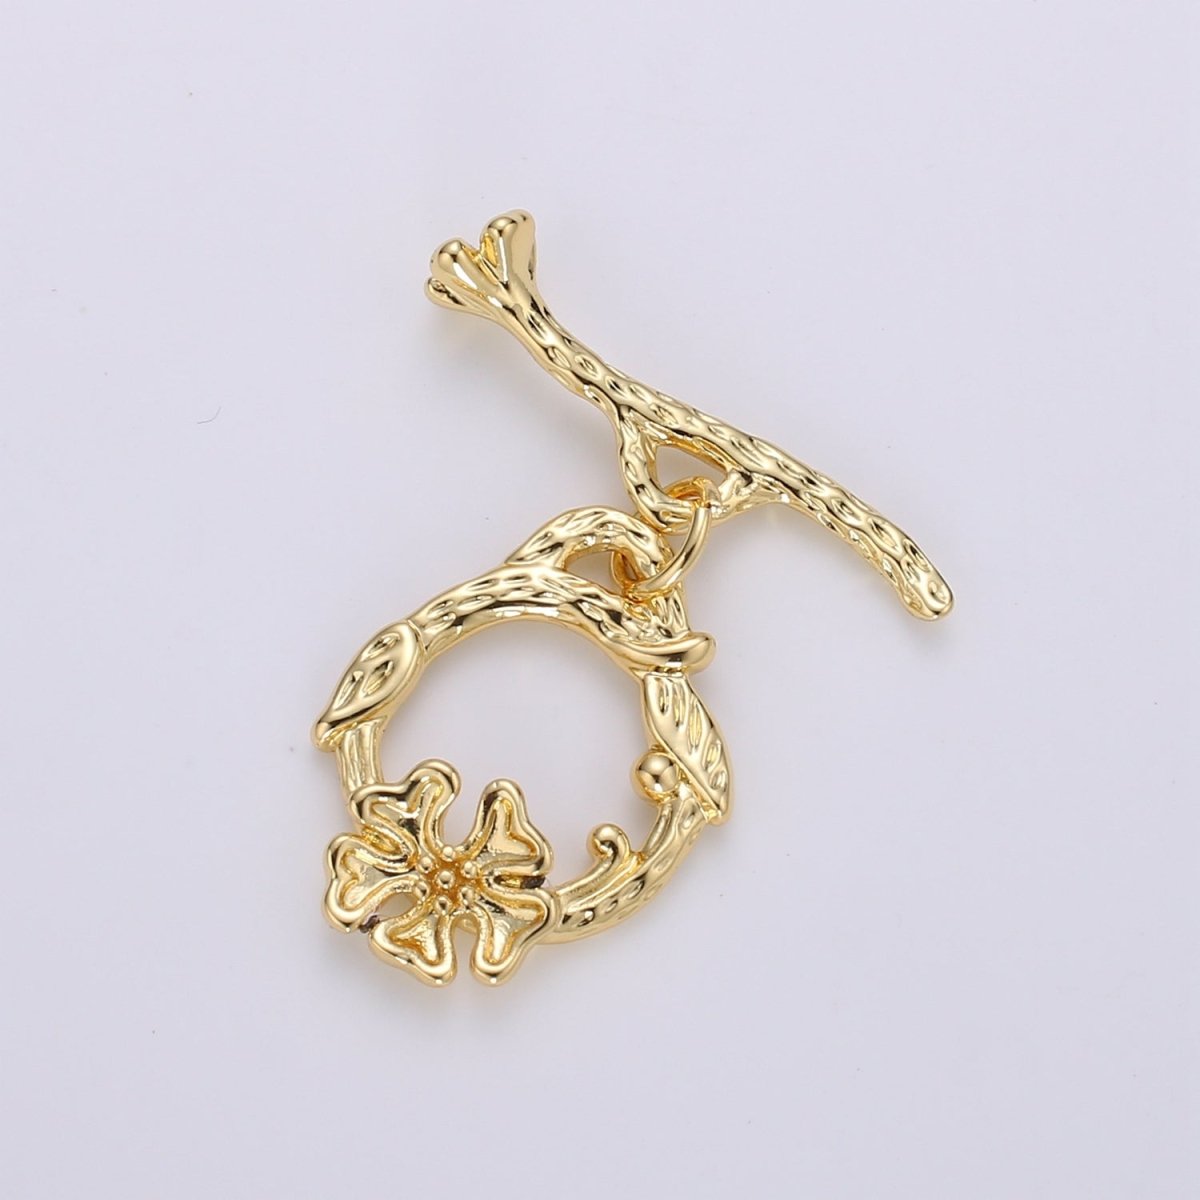 Dainty Gold Toggle Clasp 24K Gold Filled Flower Toggle Clasps Fancy Design OT Clasp Supply for Bracelet Necklace Component - DLUXCA